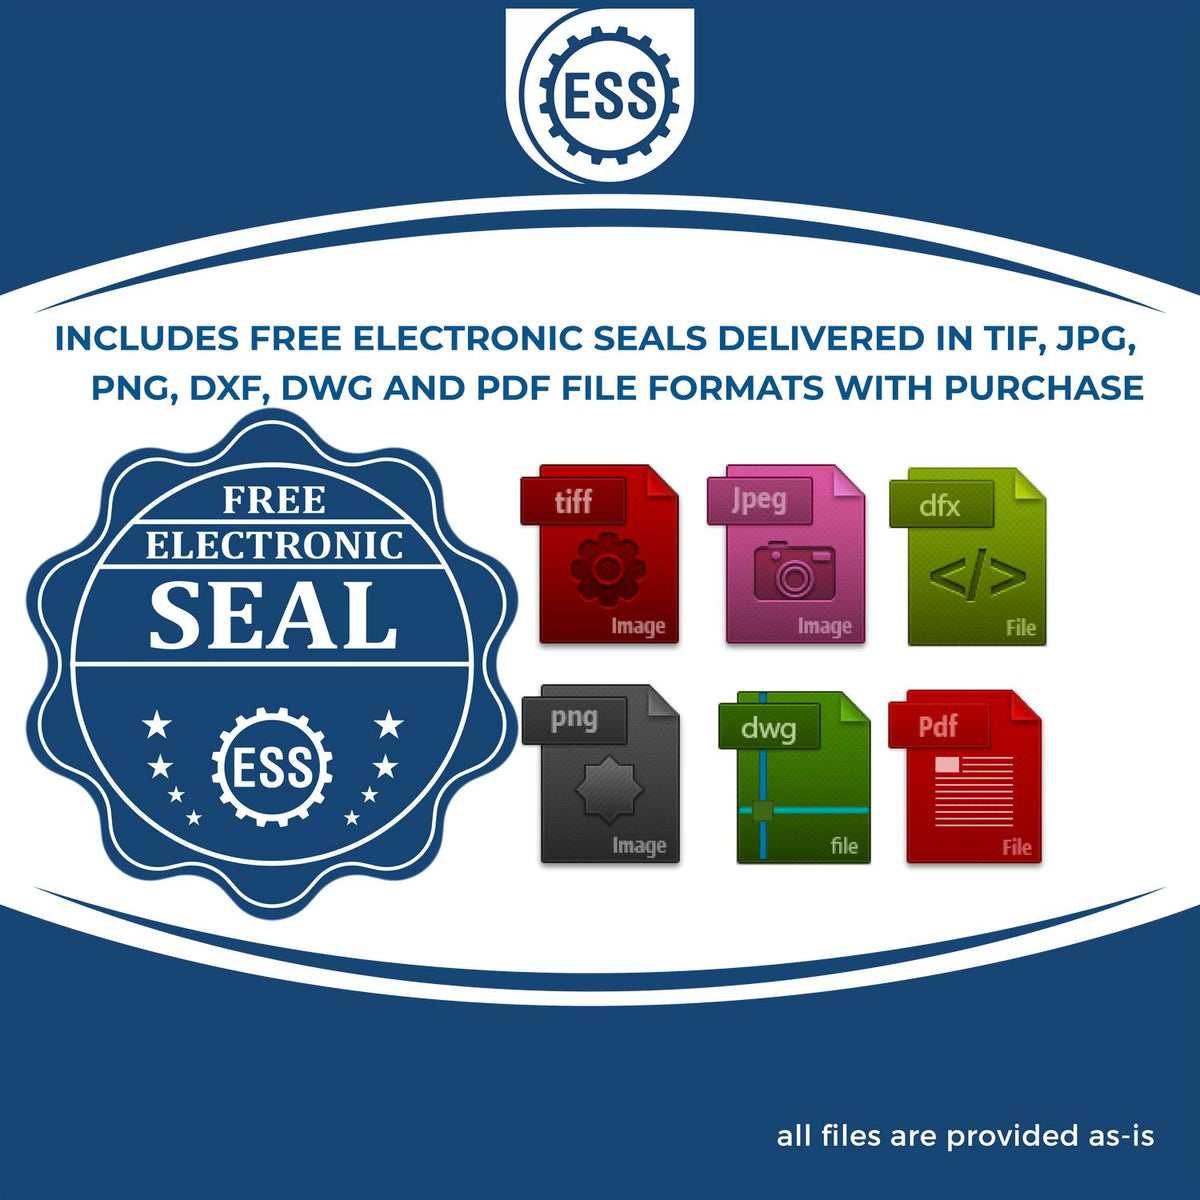 An infographic for the free electronic seal for the Wooden Handle Maine State Seal Notary Public Stamp illustrating the different file type icons such as DXF, DWG, TIF, JPG and PNG.